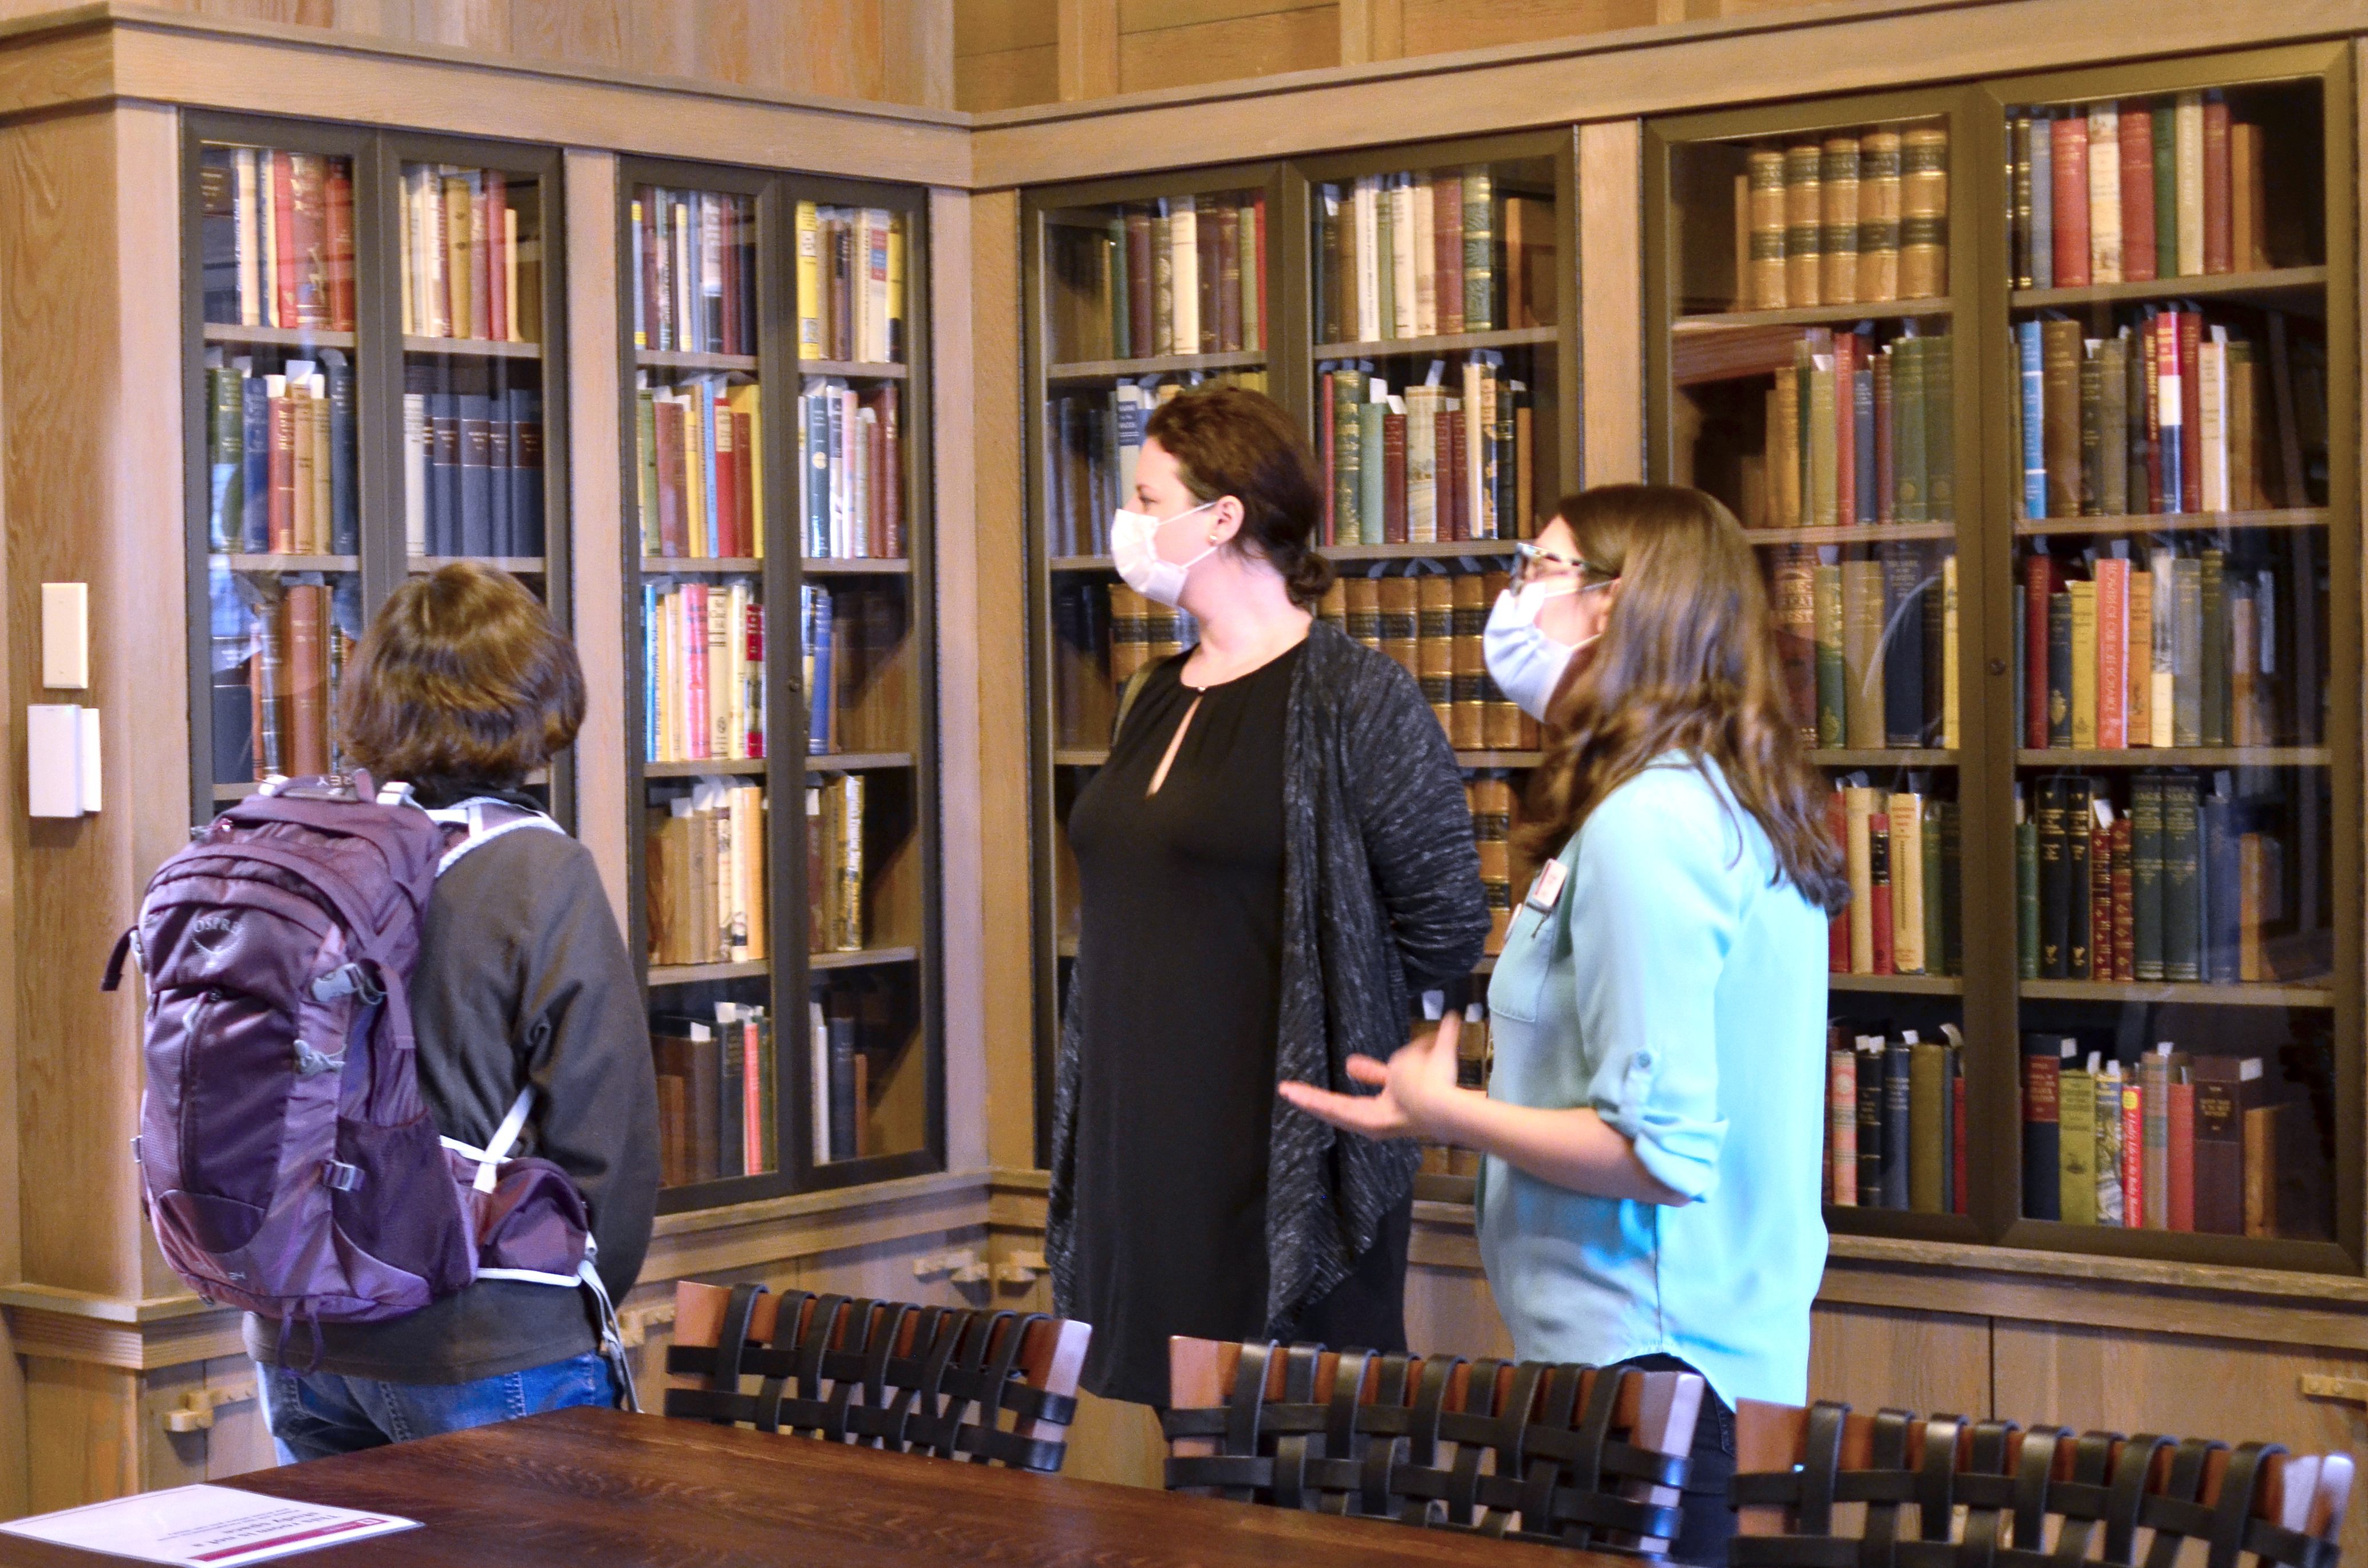 As part of a tour of the Lilly Library, a librarian talks about some of the books on display in the Ellison Room while two tour participants listen.